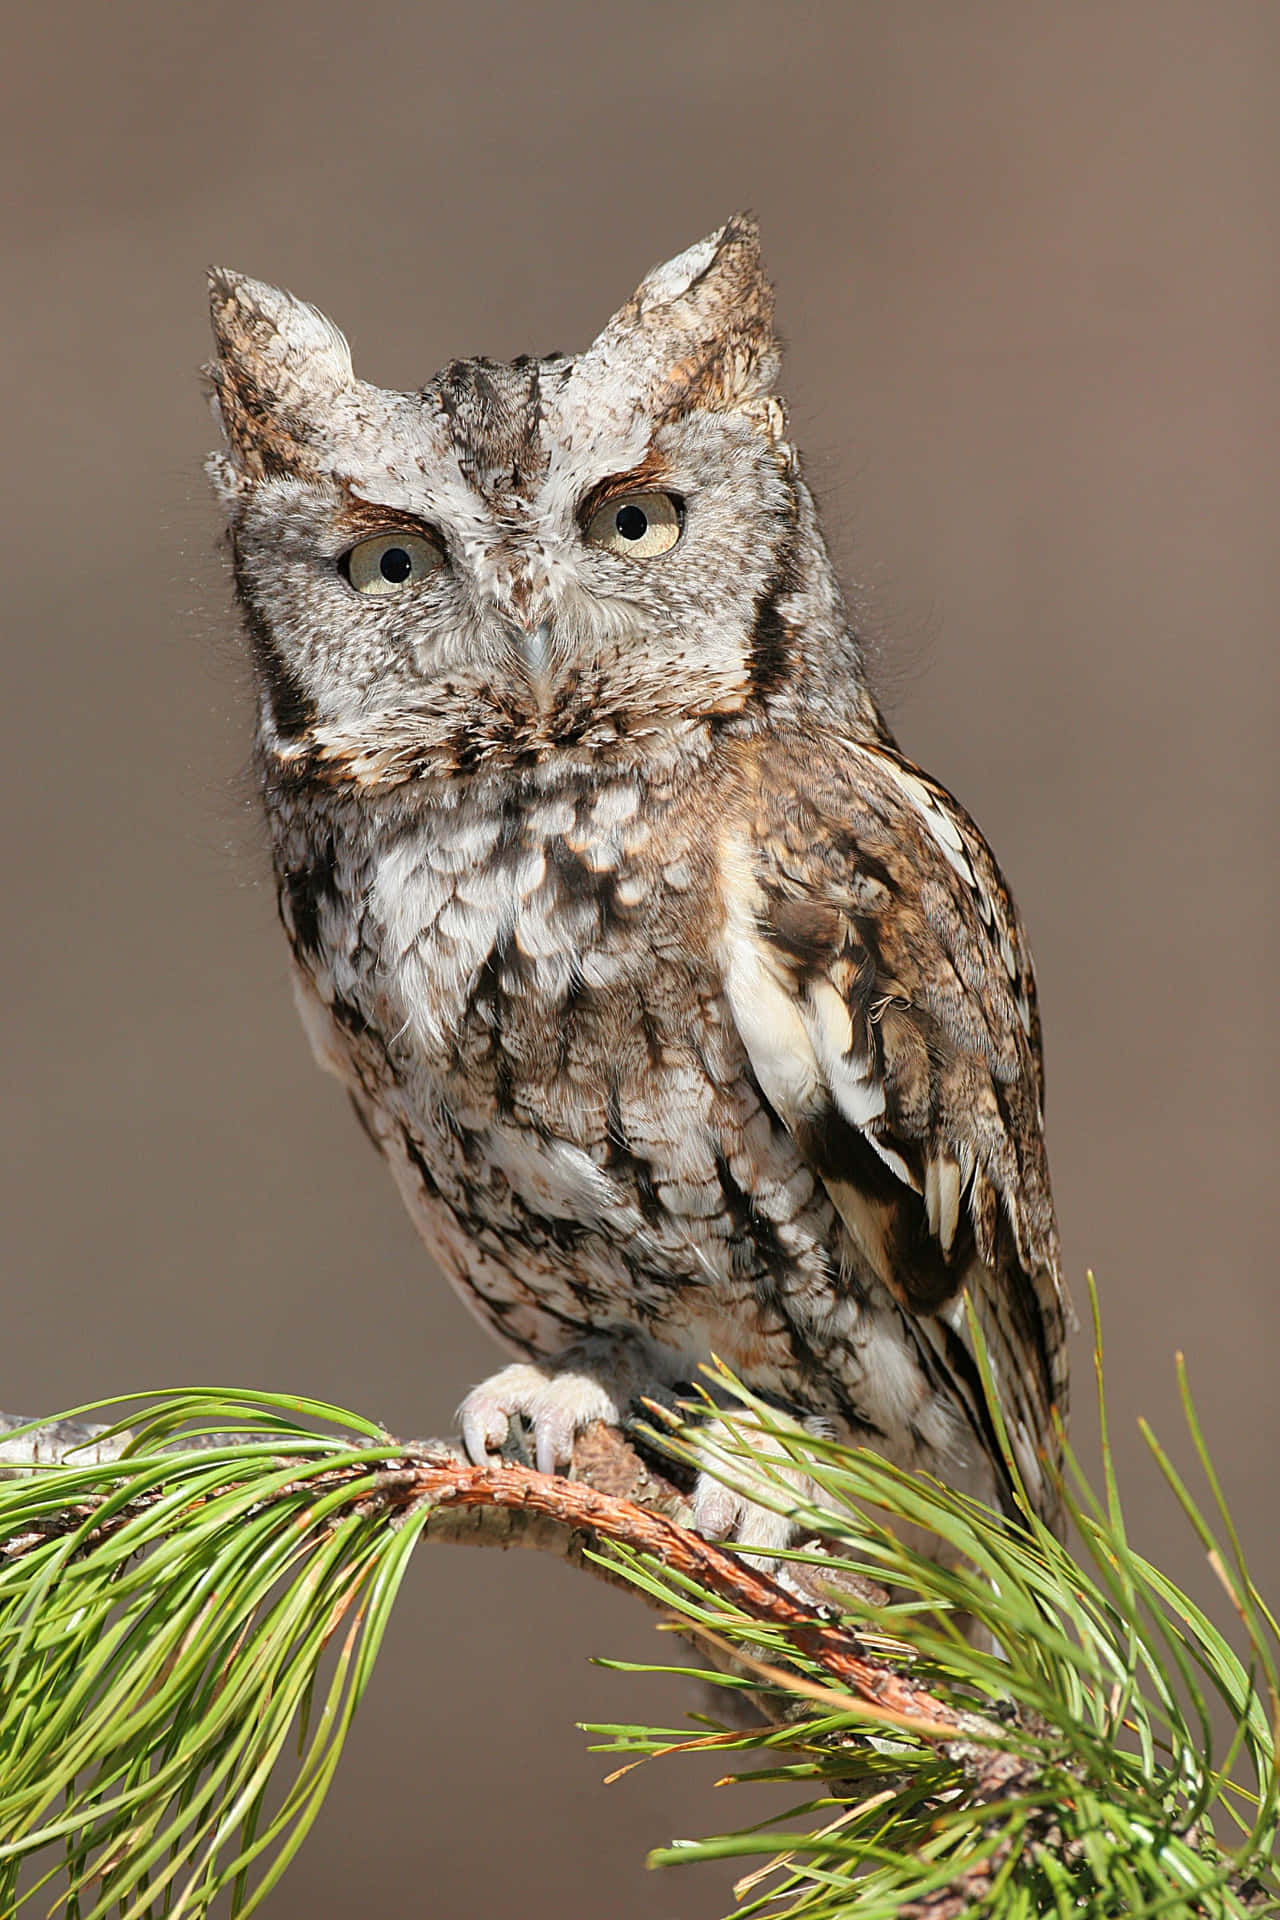 A Small Owl Perched On A Pine Branch